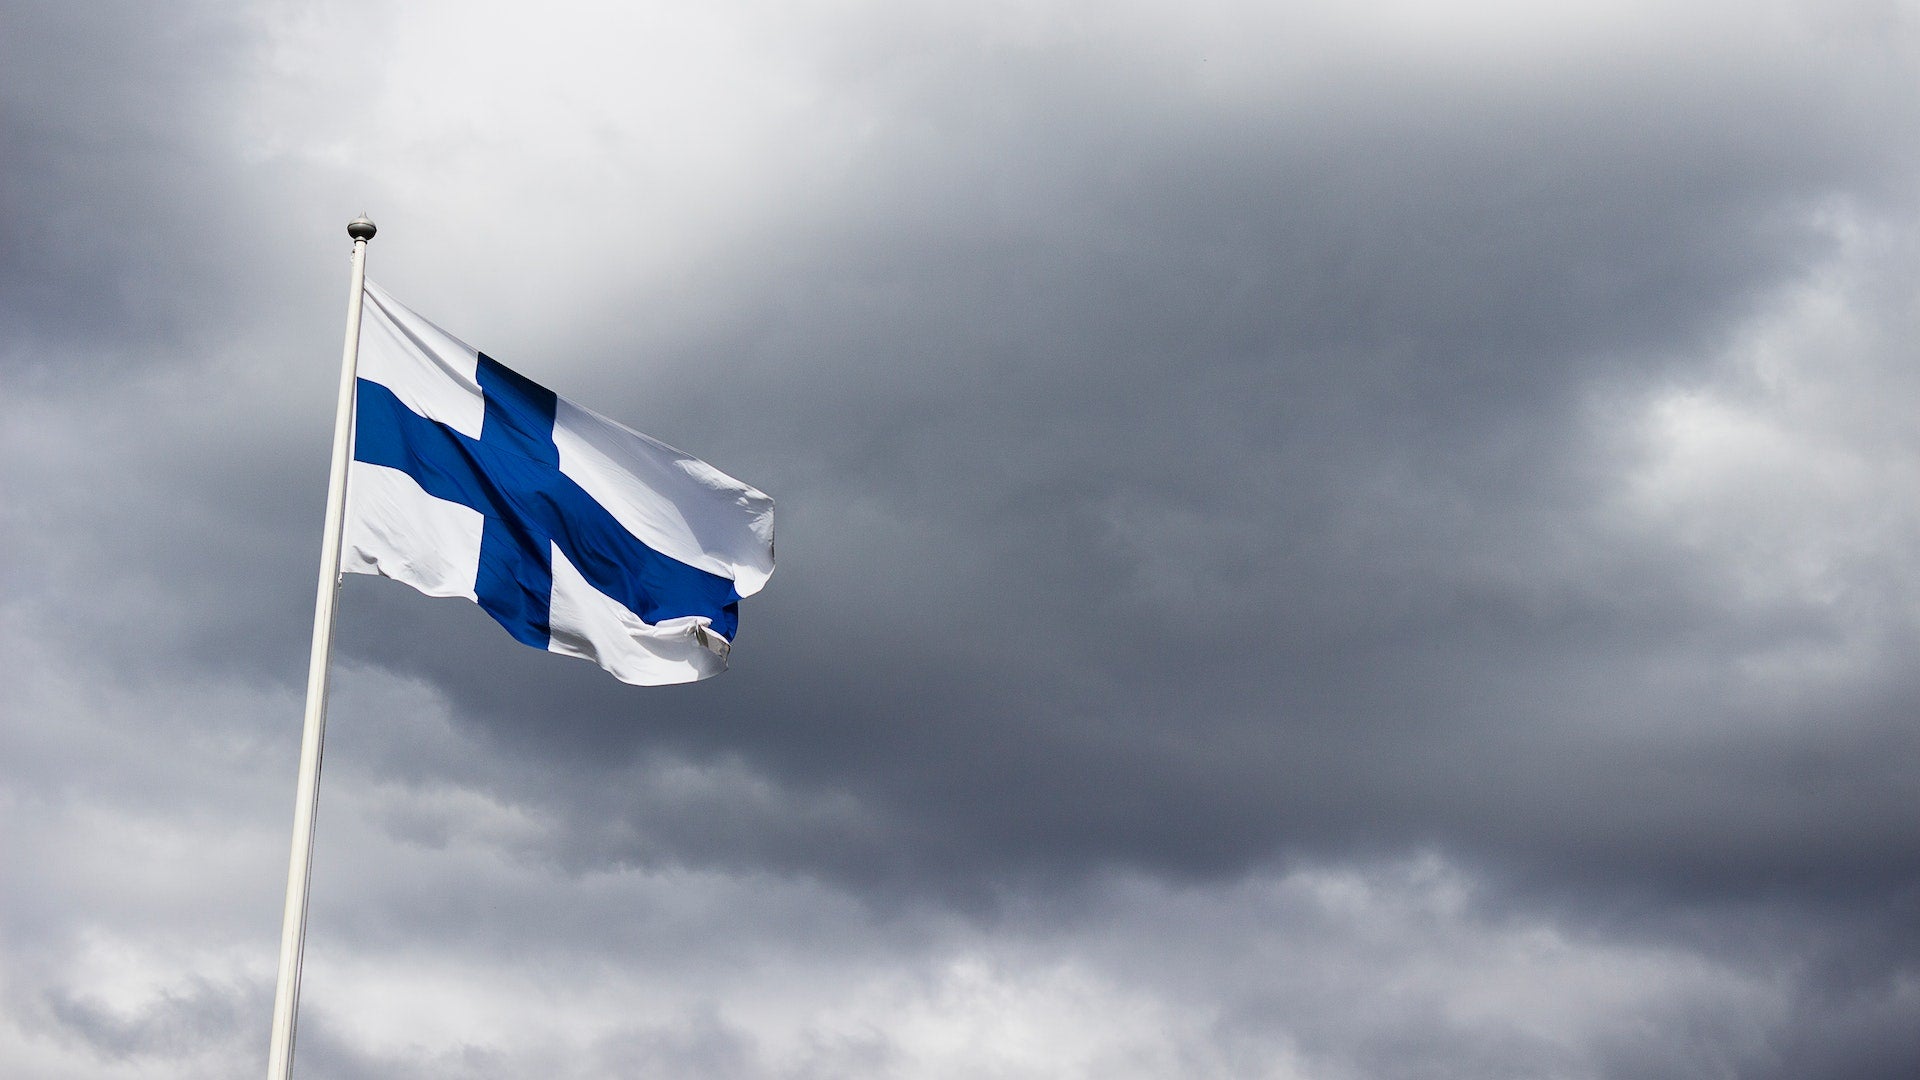 A photo of the flag of Finland